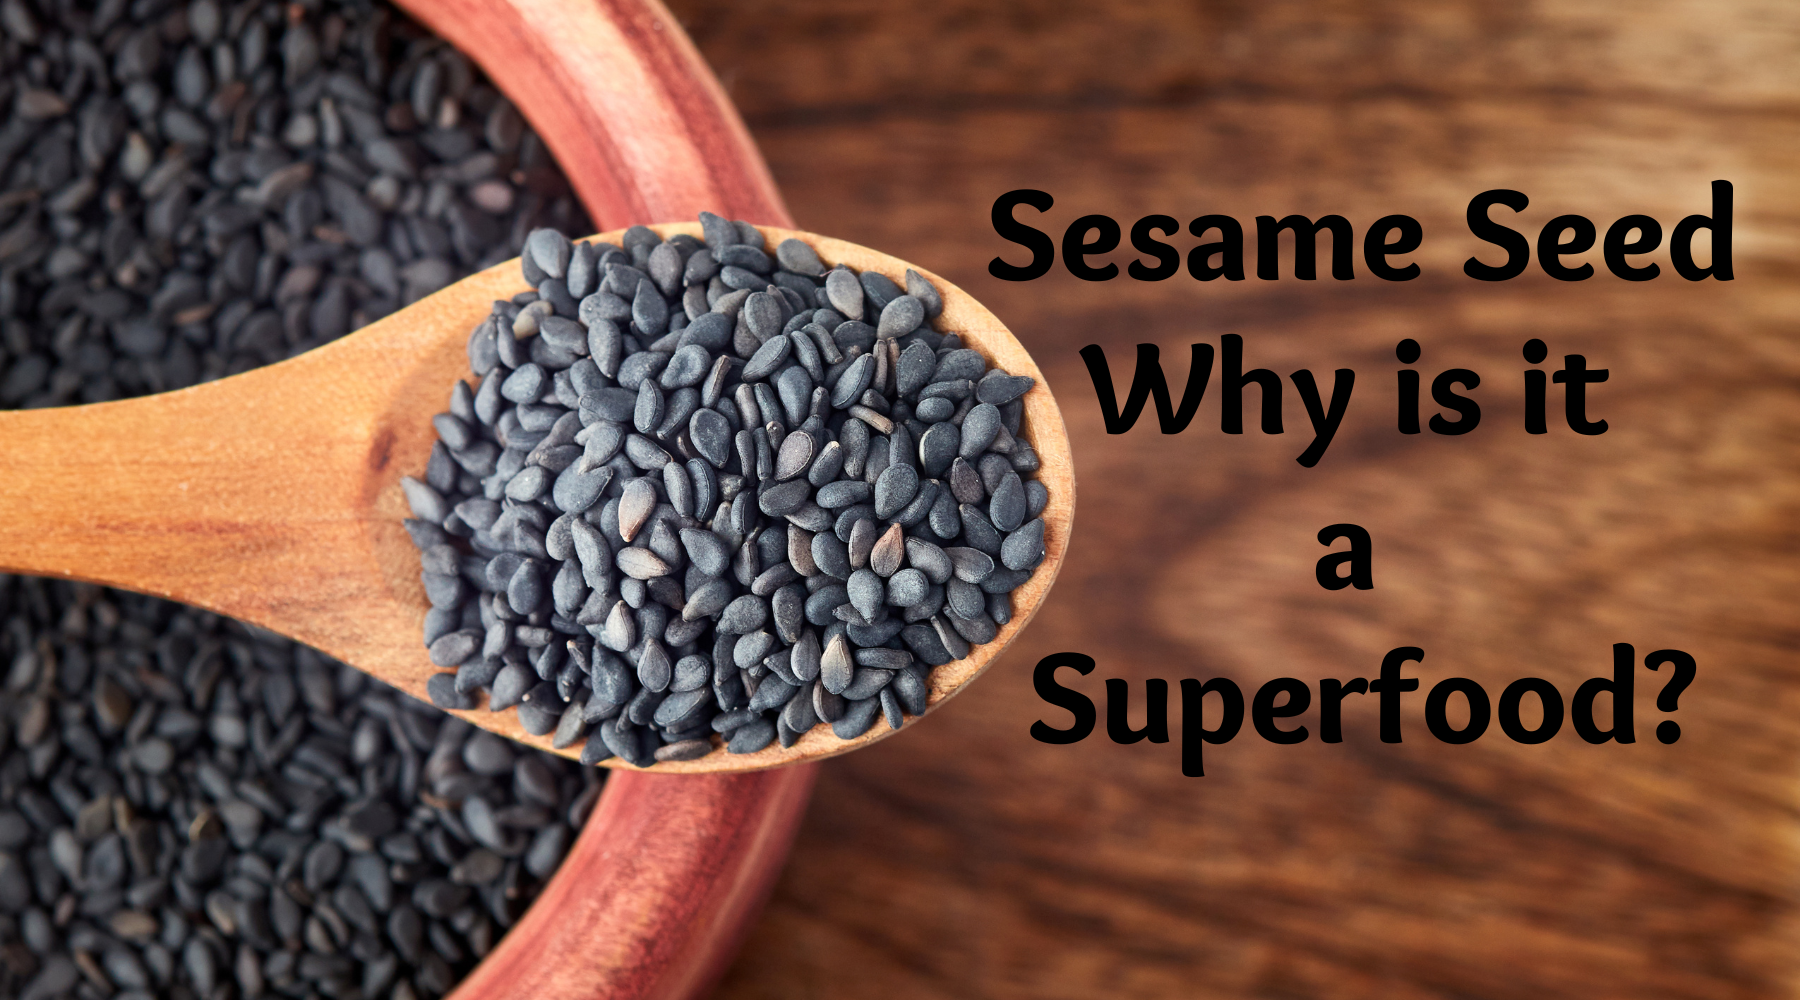 Sesame Seed: Why is it a Superfood?